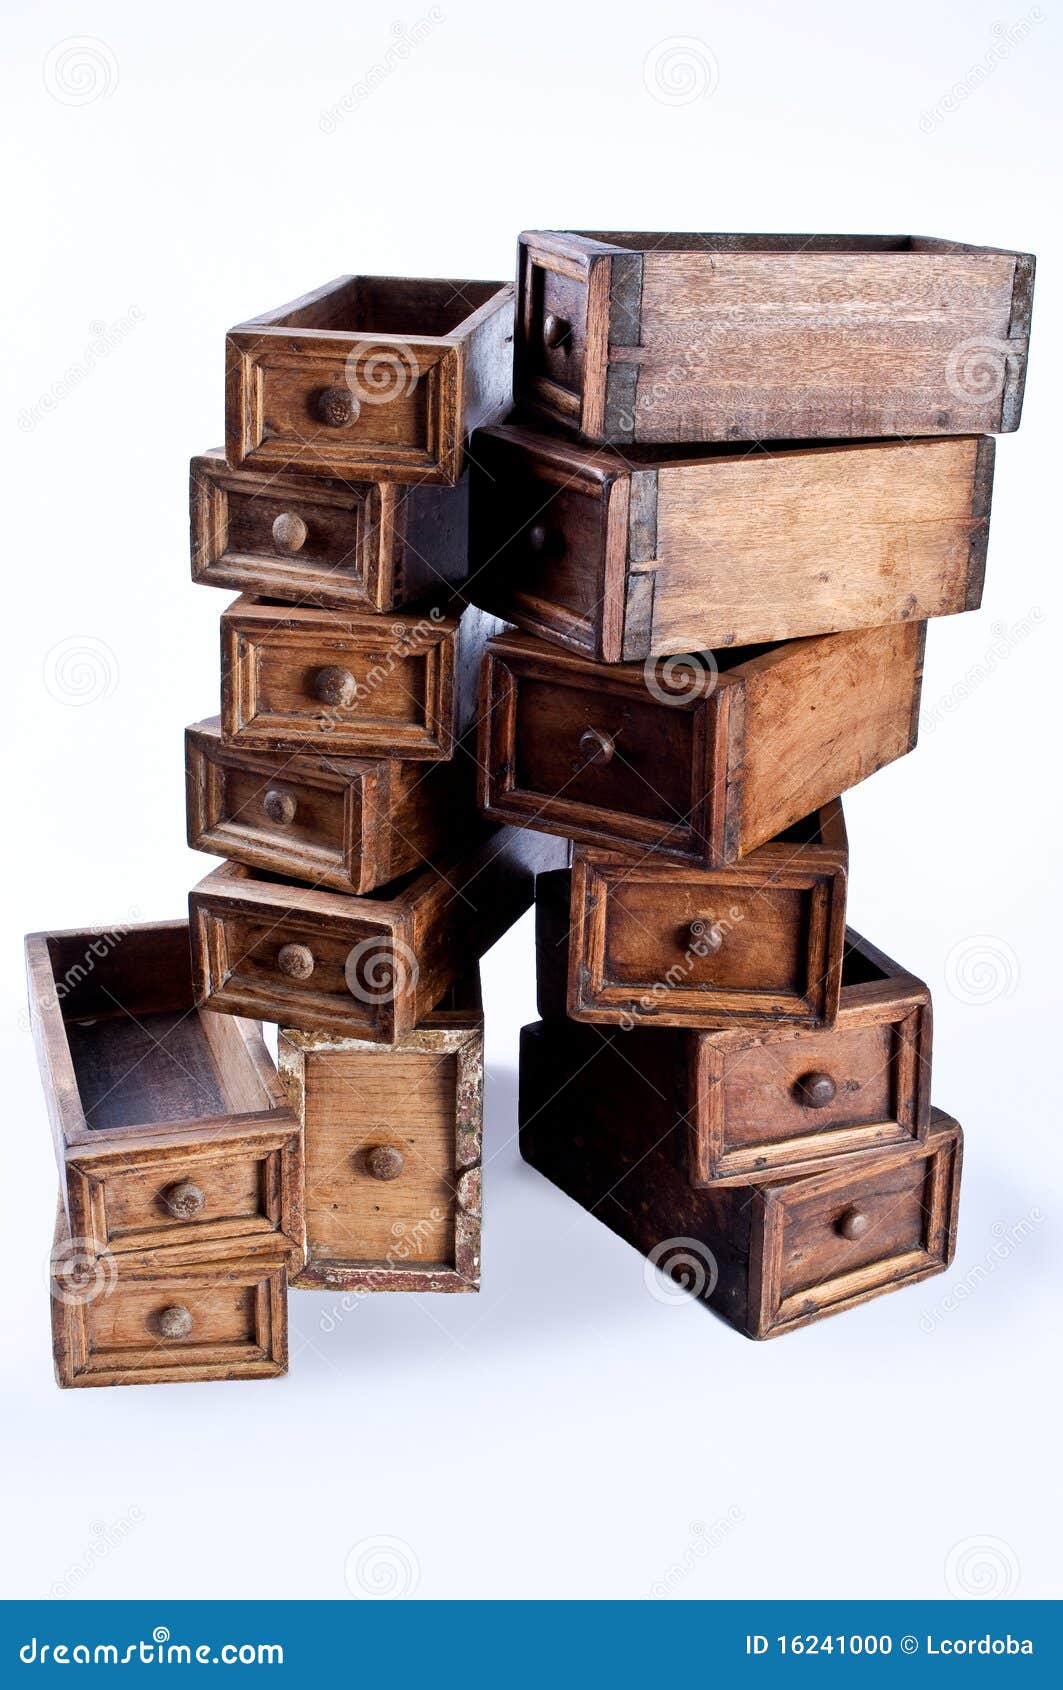 multiple chest drawers stacked one above another